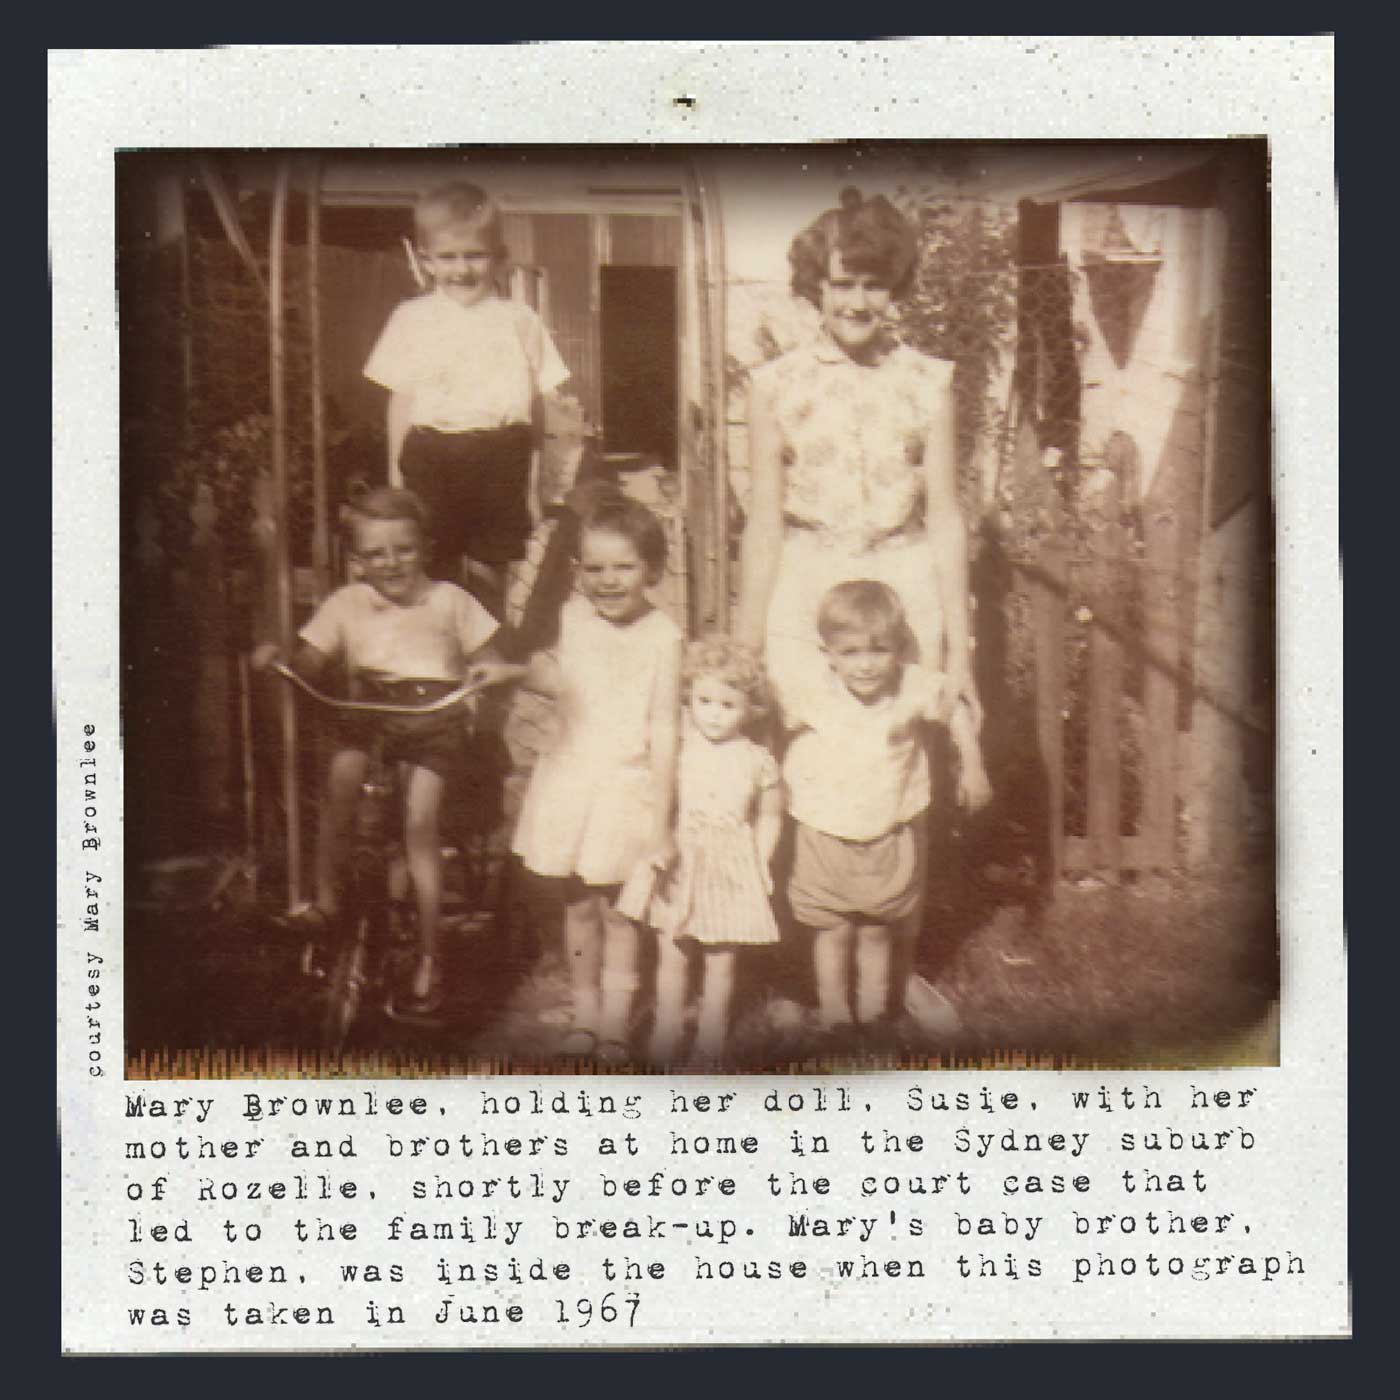 Black and white Polaroid photograph showing a young woman with three small boys and a small girl outside a house. They are positioned in a group facing the camera and all smiling. One the boys is sitting on a tricycle and the girl is holding a large doll. Typewritten text underneath reads: 'Mary Brownlee, holding her doll, Susie, with her mother and brothers at home in the Sydney suburb of Rozelle, shortly before the court case that led to their family break-up. Mary's baby brother, Stephen, was inside the house when this photograph was taken in June 1967'. In smaller text, on the left-hand side of the image, in a vertical direction, reads: 'Courtesy Mary Brownlee'. - click to view larger image